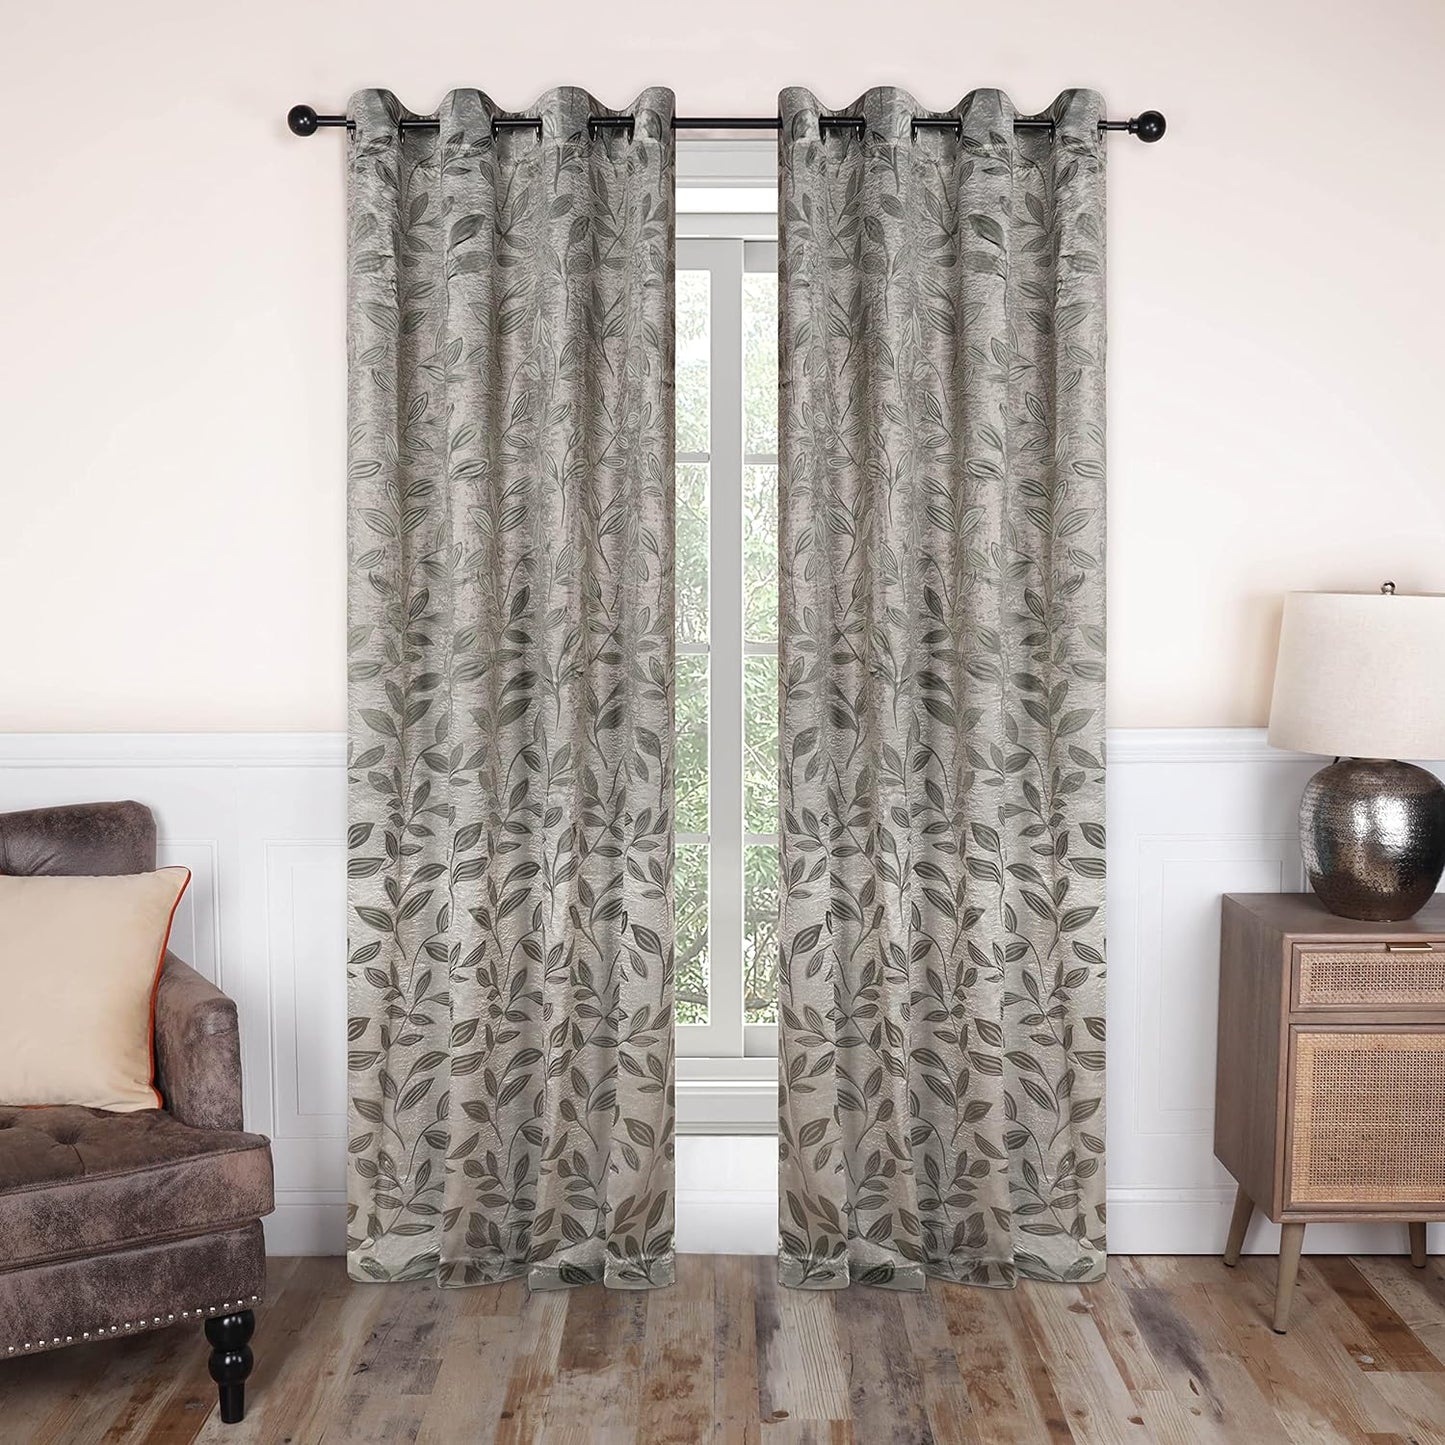 Superior Blackout Curtains, Room Darkening Window Accent for Bedroom, Sun Blocking, Thermal, Modern Bohemian Curtains, Leaves Collection, Set of 2 Panels, Rod Pocket - 52 in X 63 In, Nickel Black  Home City Inc. Sage 52 In X 72 In (W X L) 